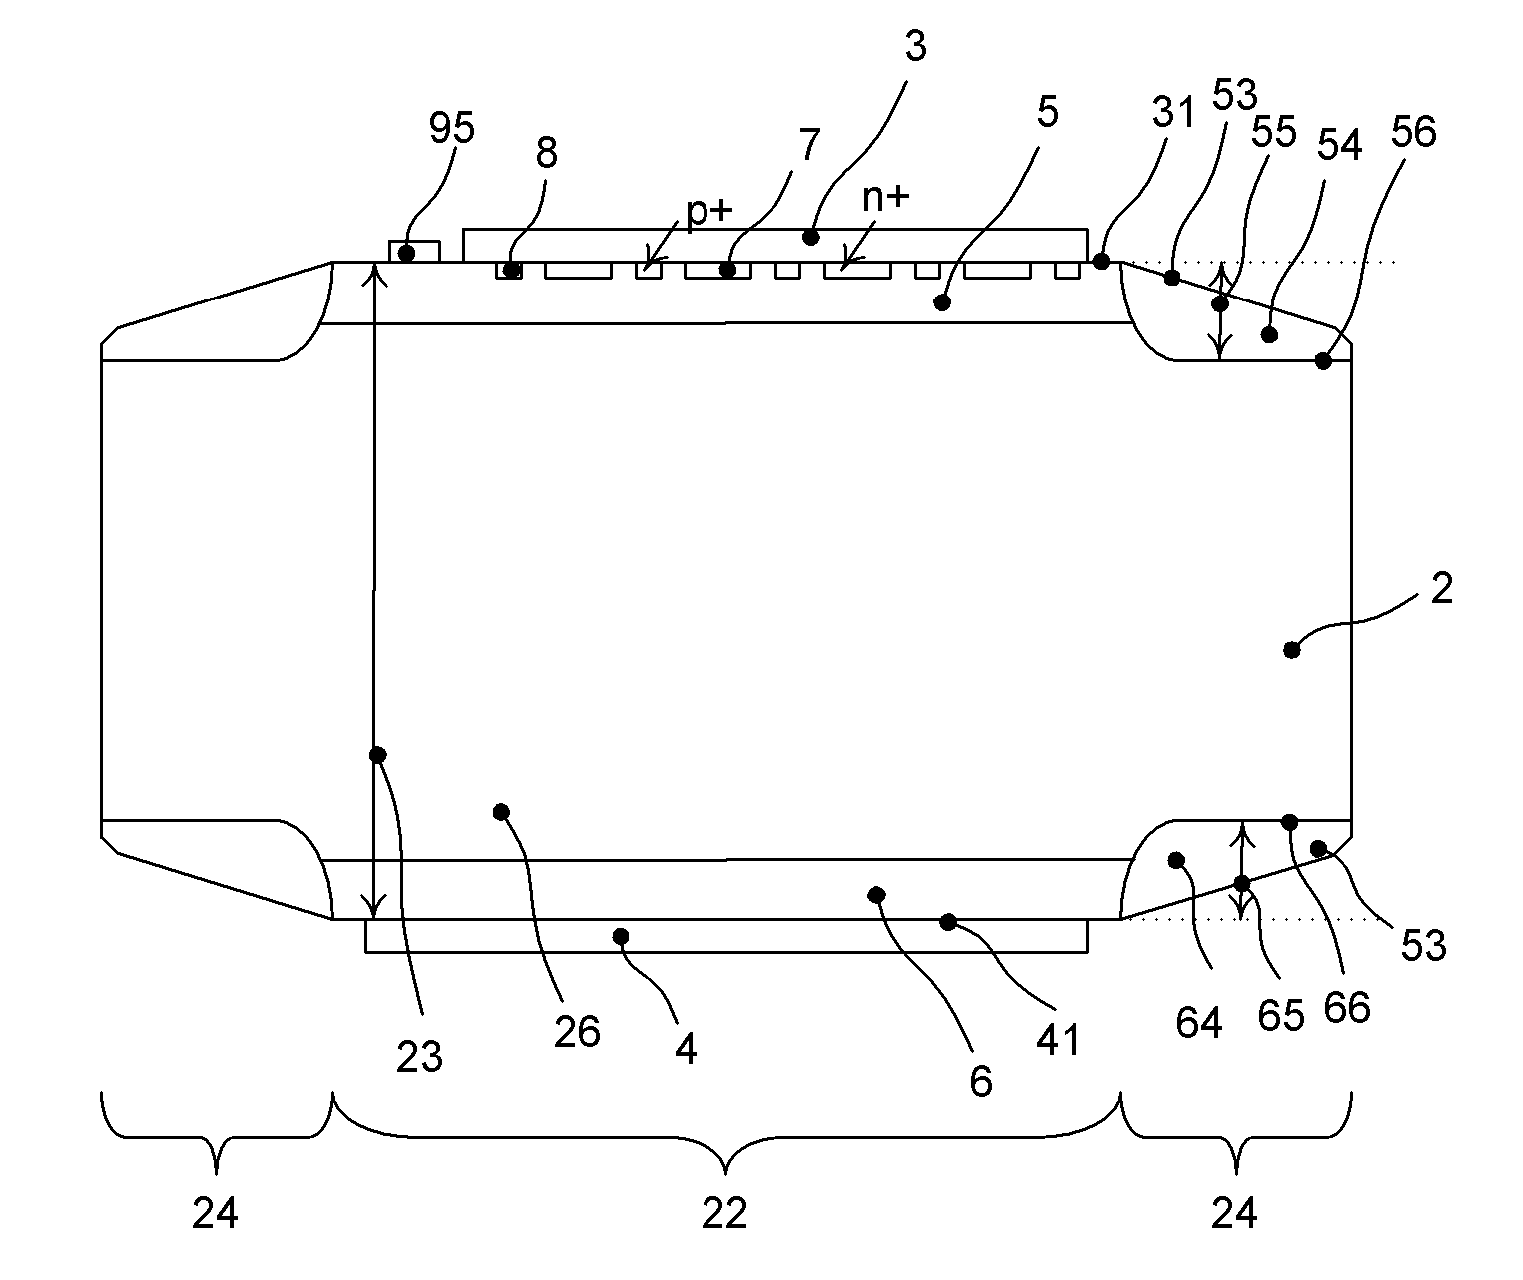 Bipolar non-punch-hrough power semiconductor device